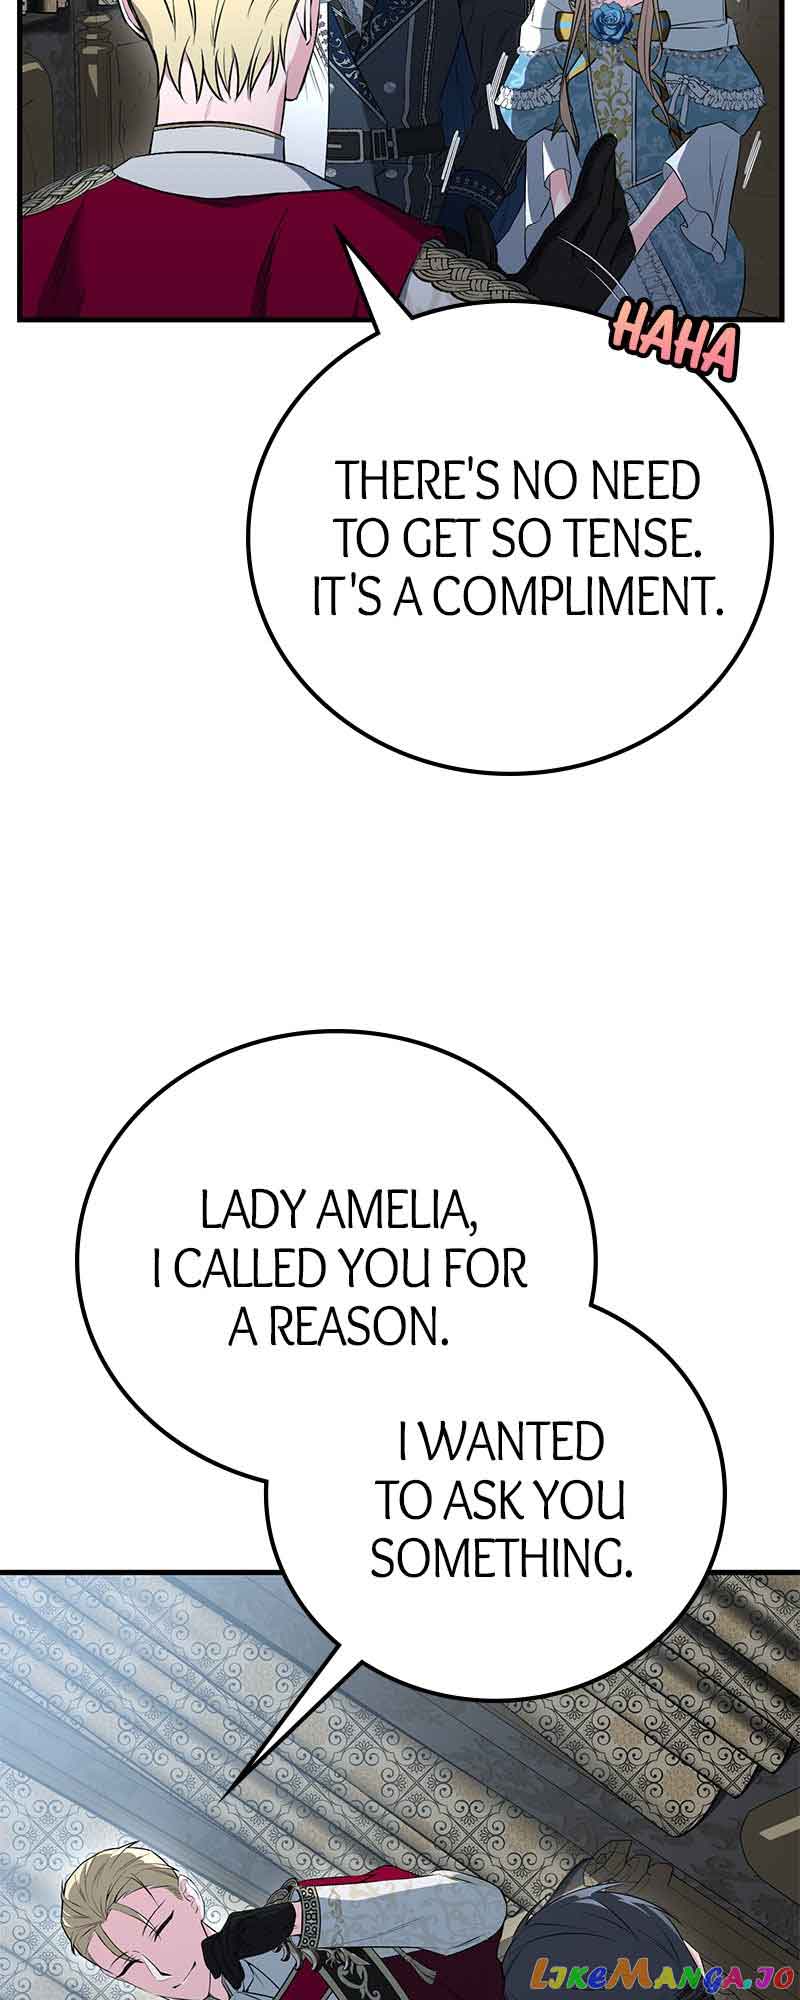 Amelia’s Contract Marriage chapter 16